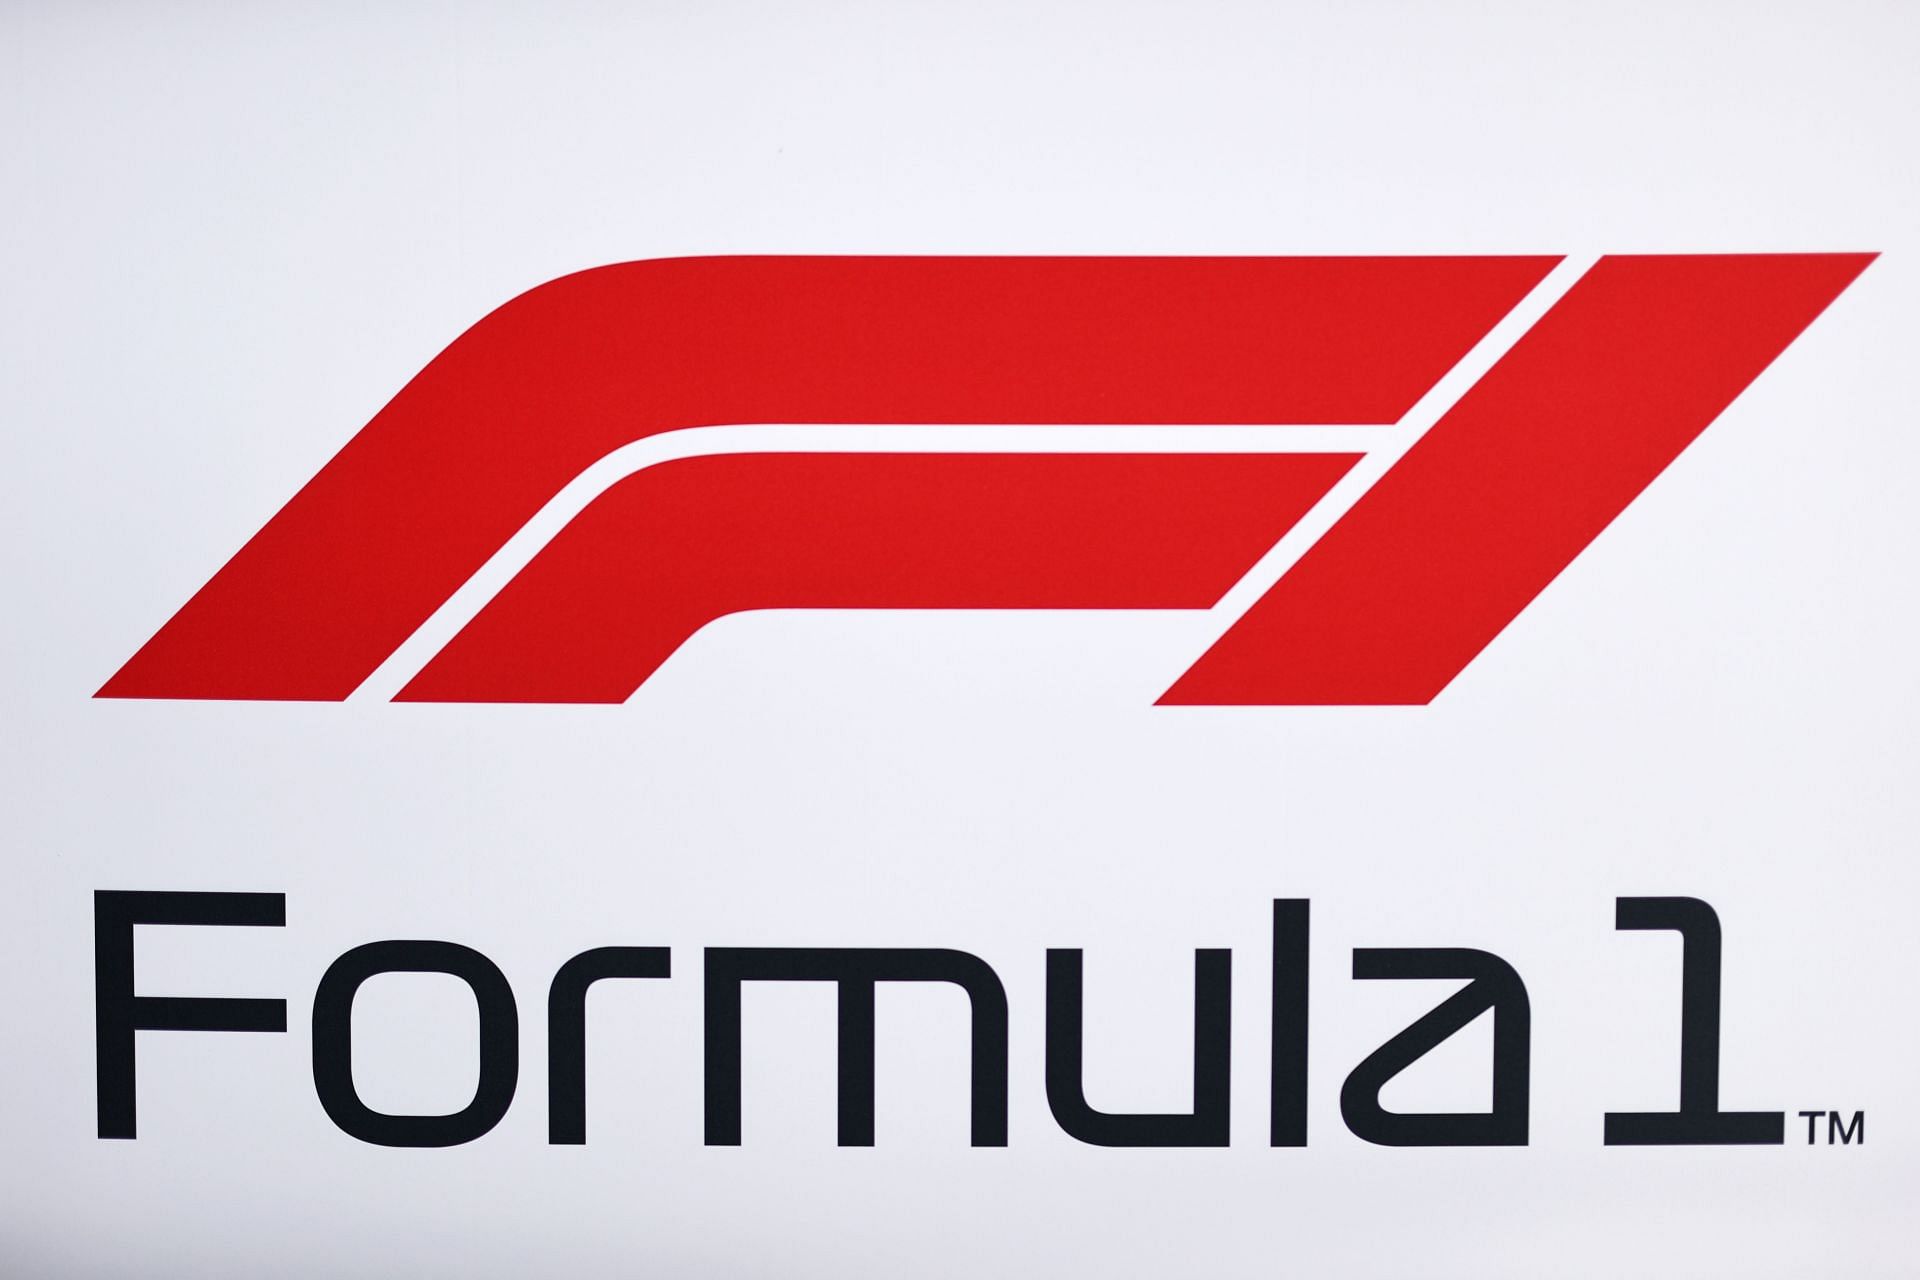 Entire F1 2021 season now available to all subscribers of F1TV